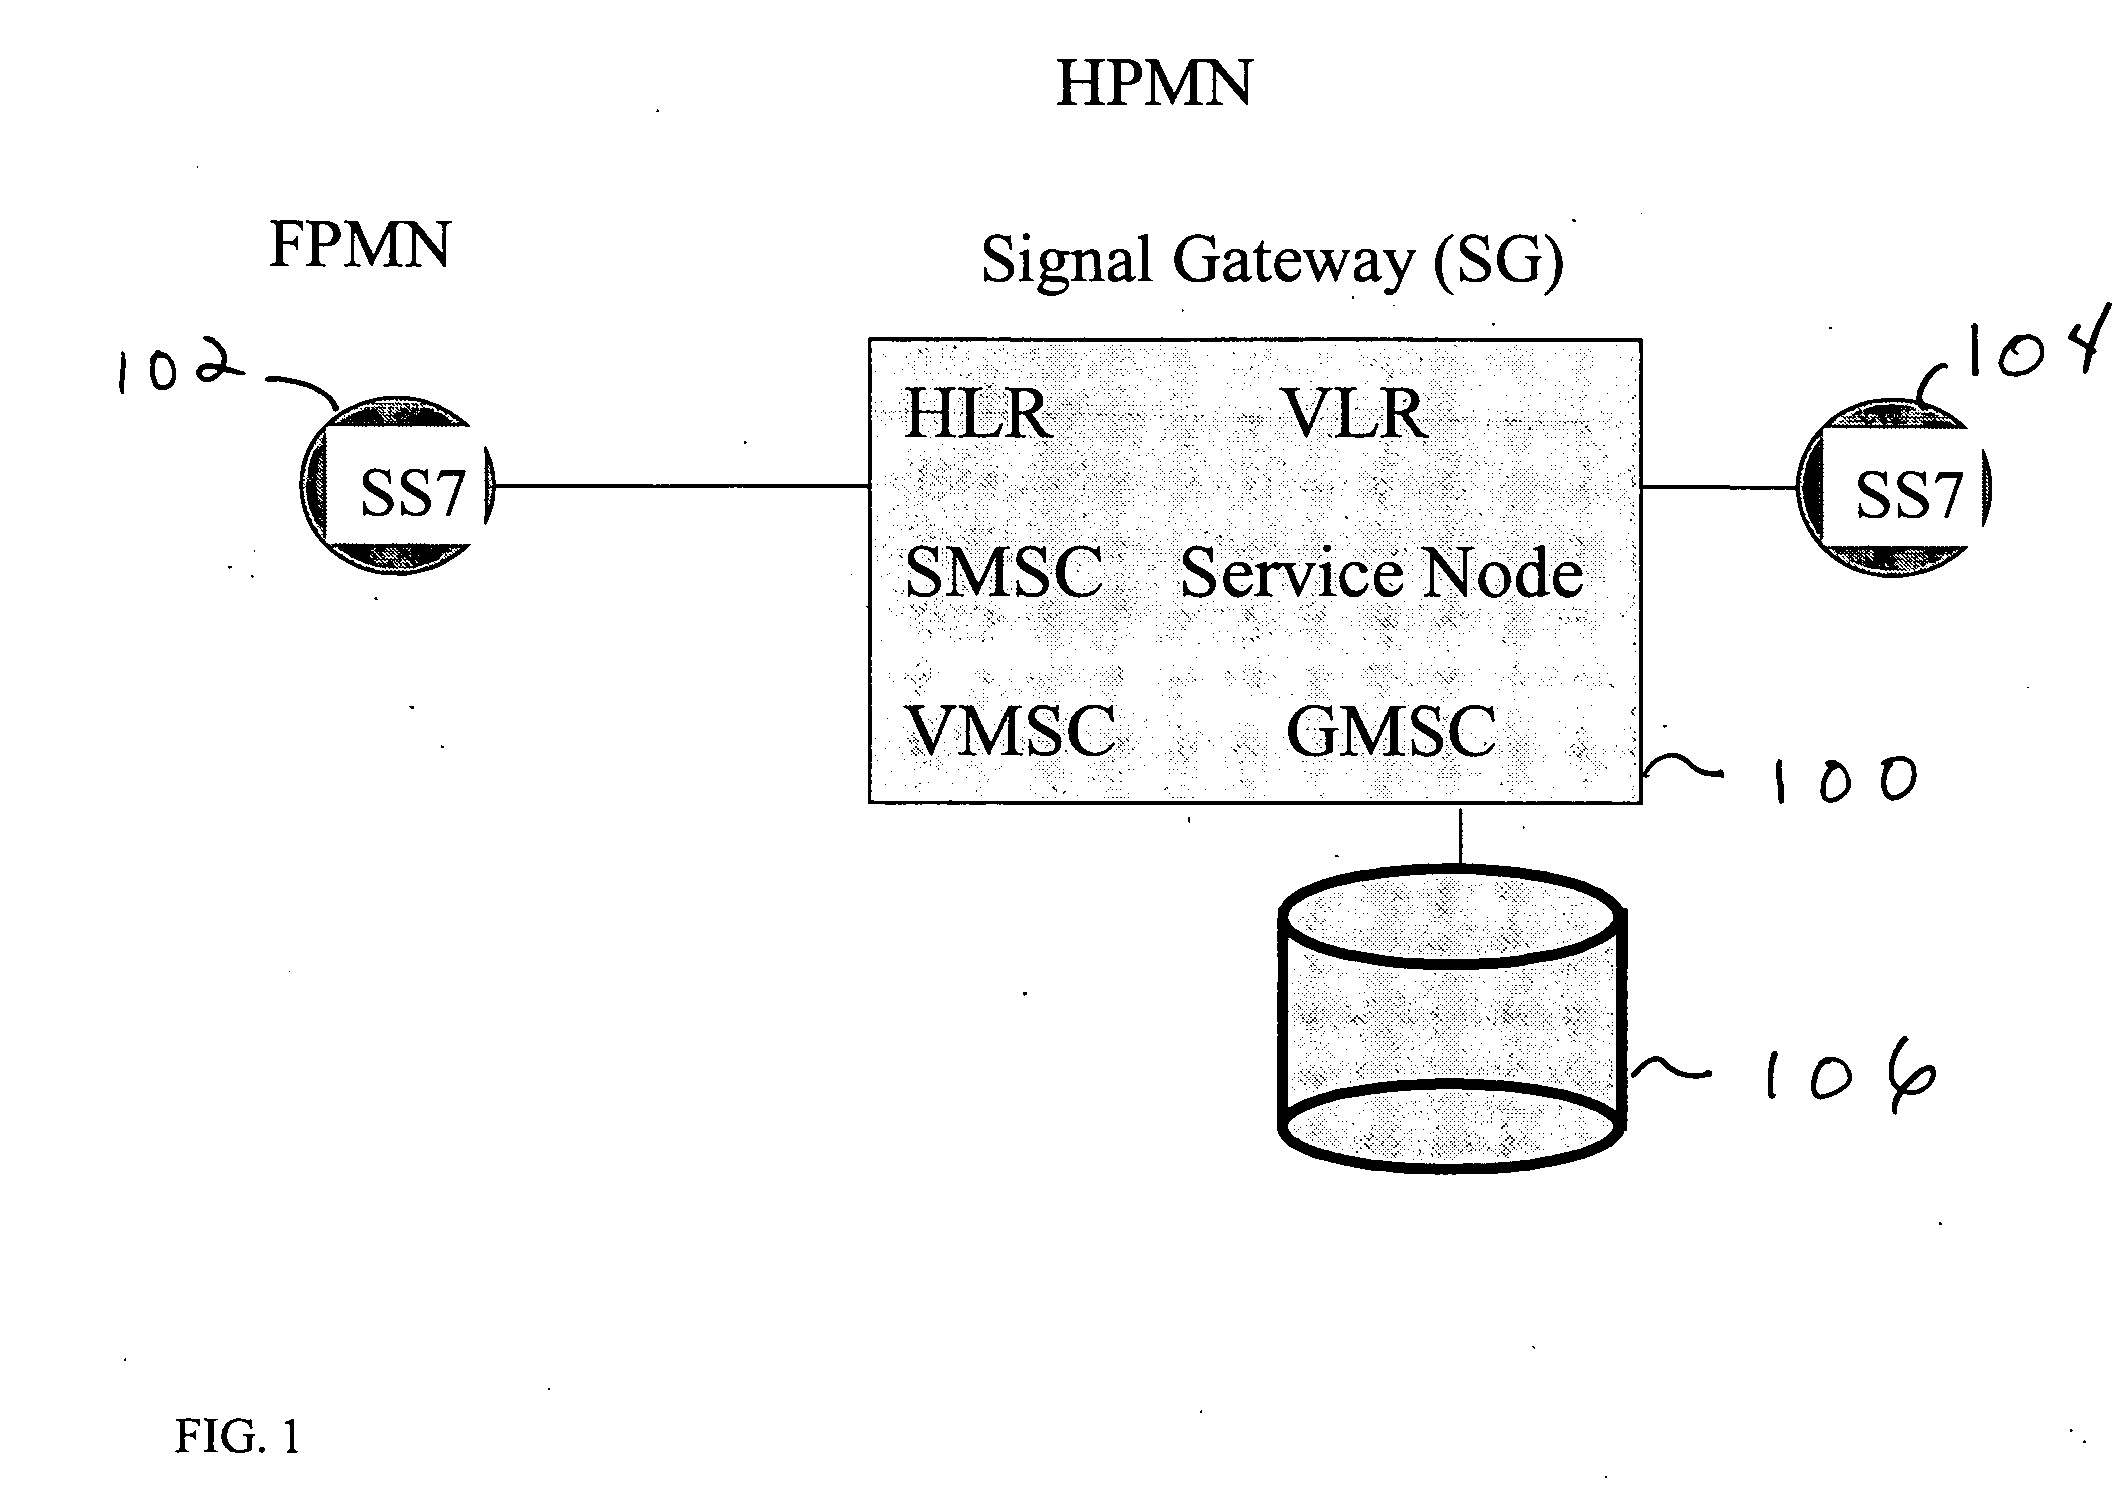 Signaling gateway with multiple IMSI with multiple MSISDN (MIMM) service in a single SIM for multiple roaming partners